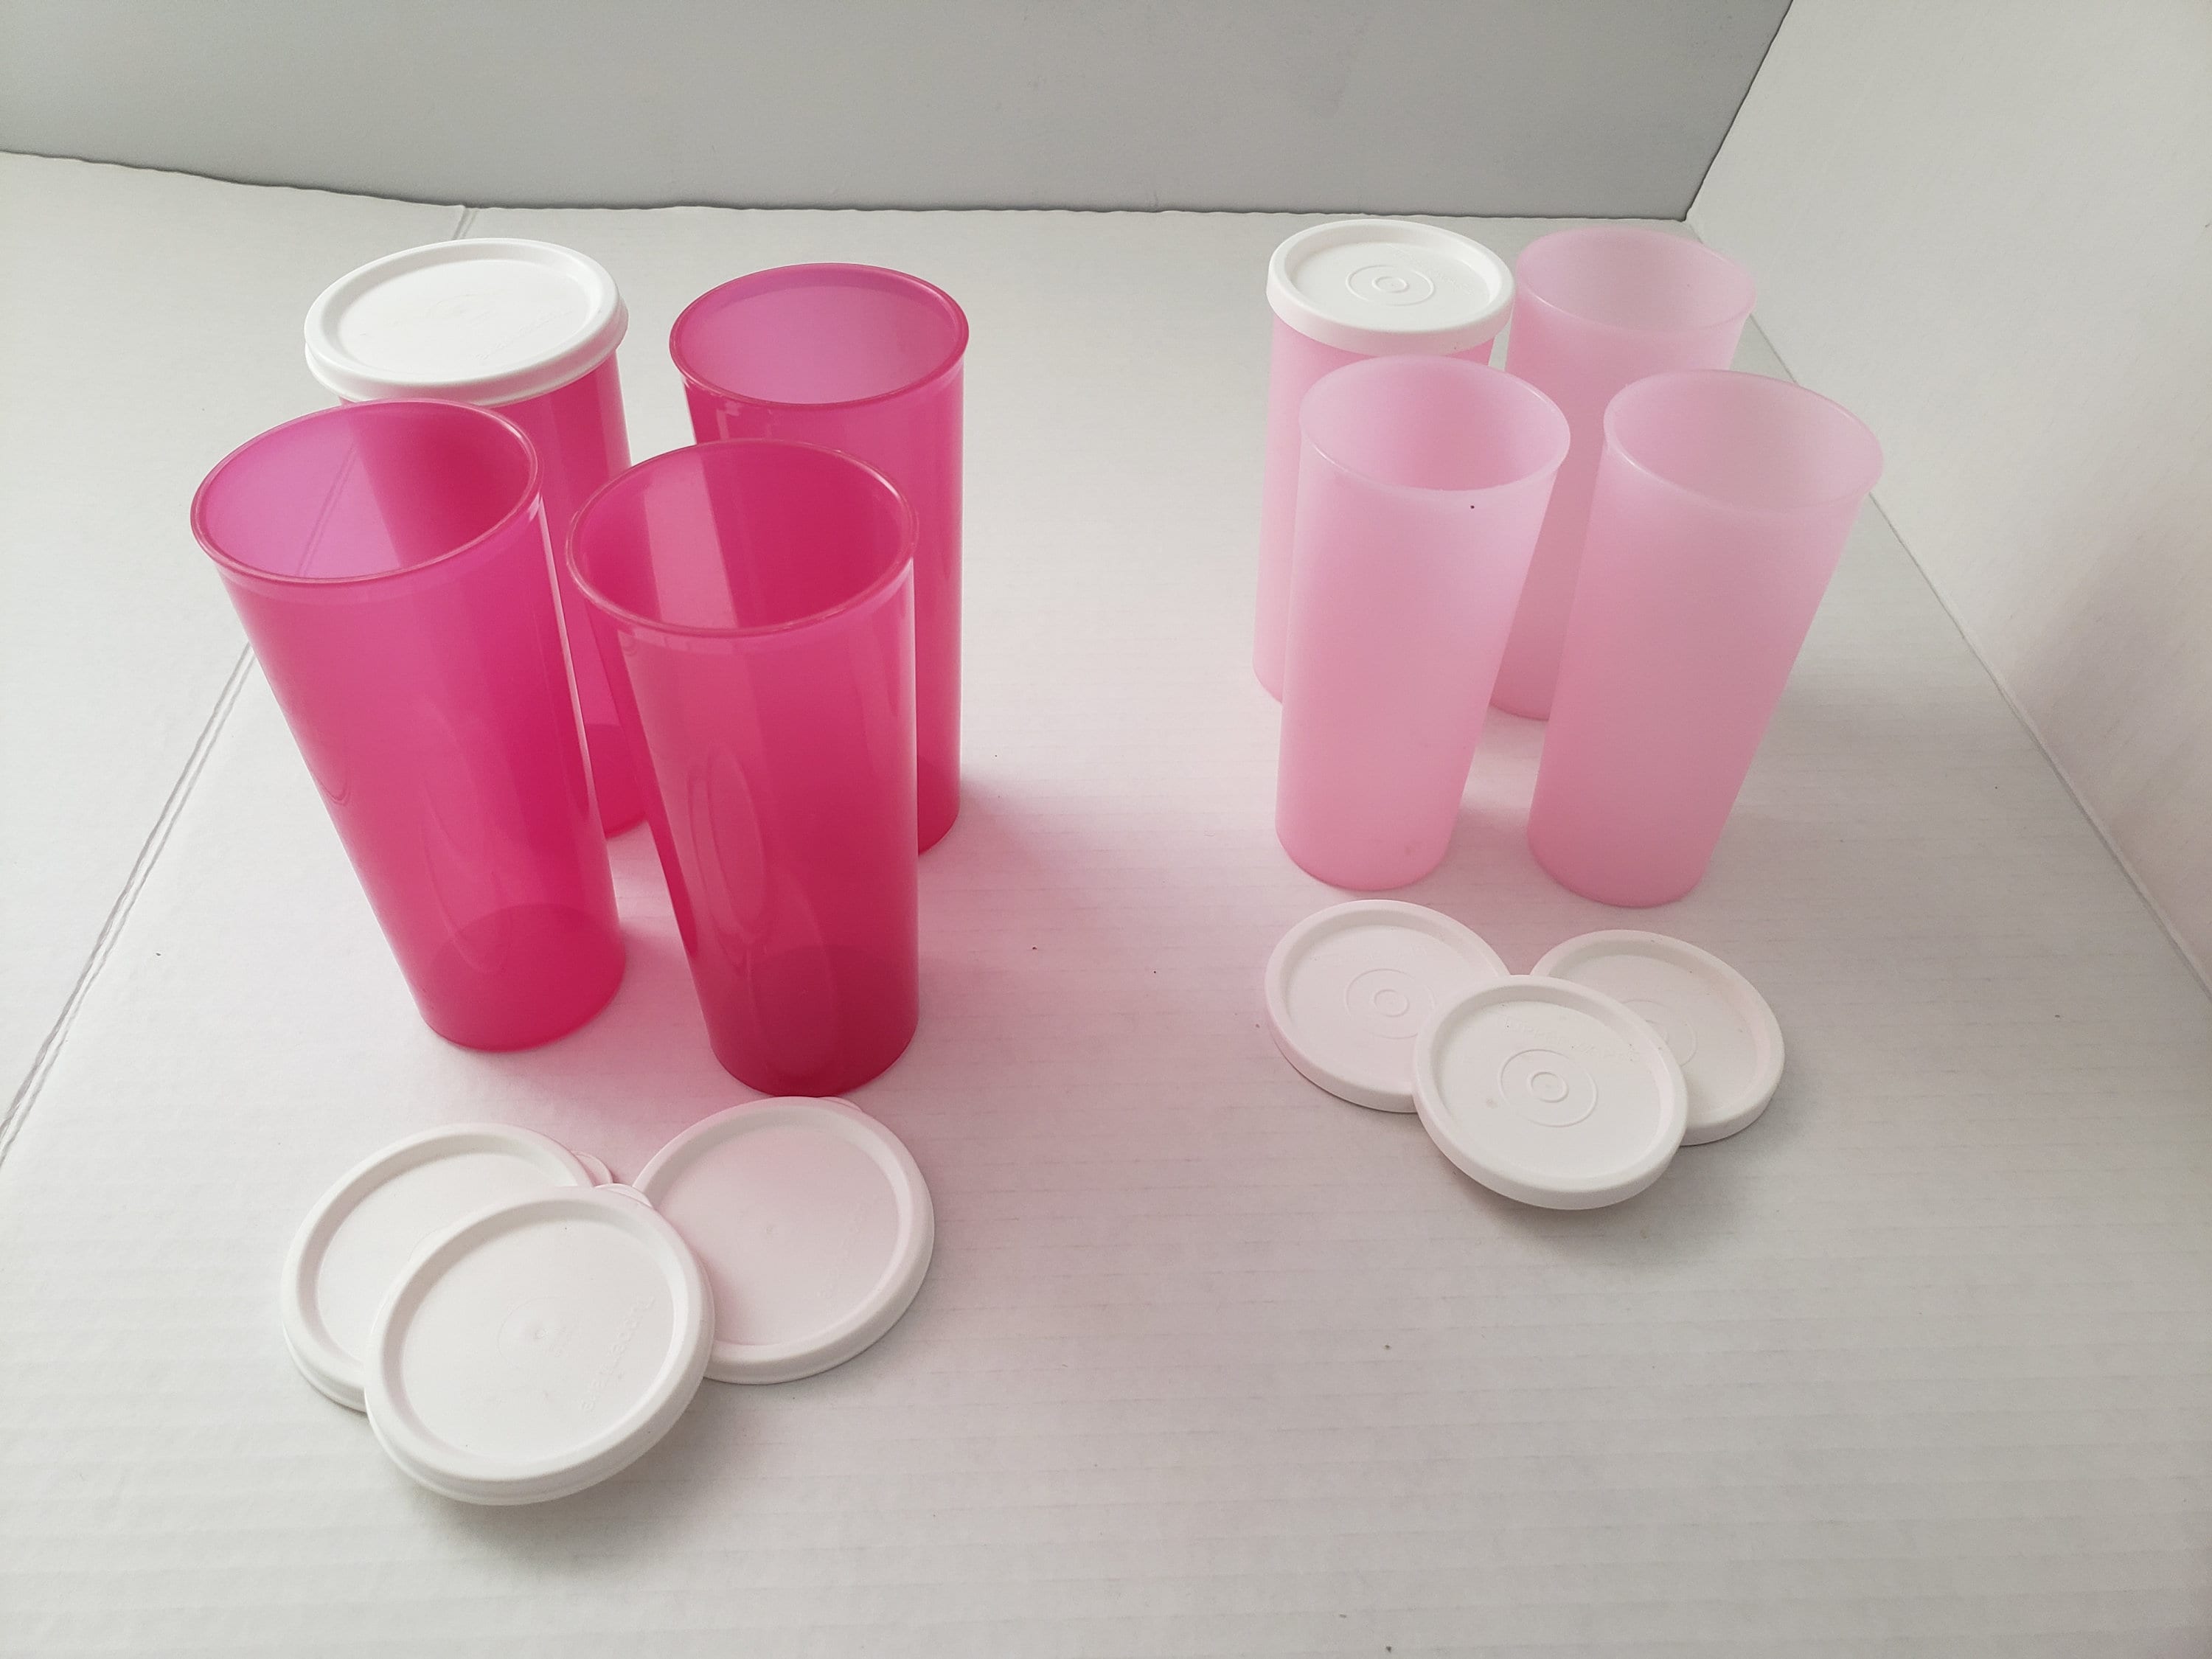 Tupperware Tumblers with lids (4) 12oz Pink Kitchen Drinkware Beverage Cups